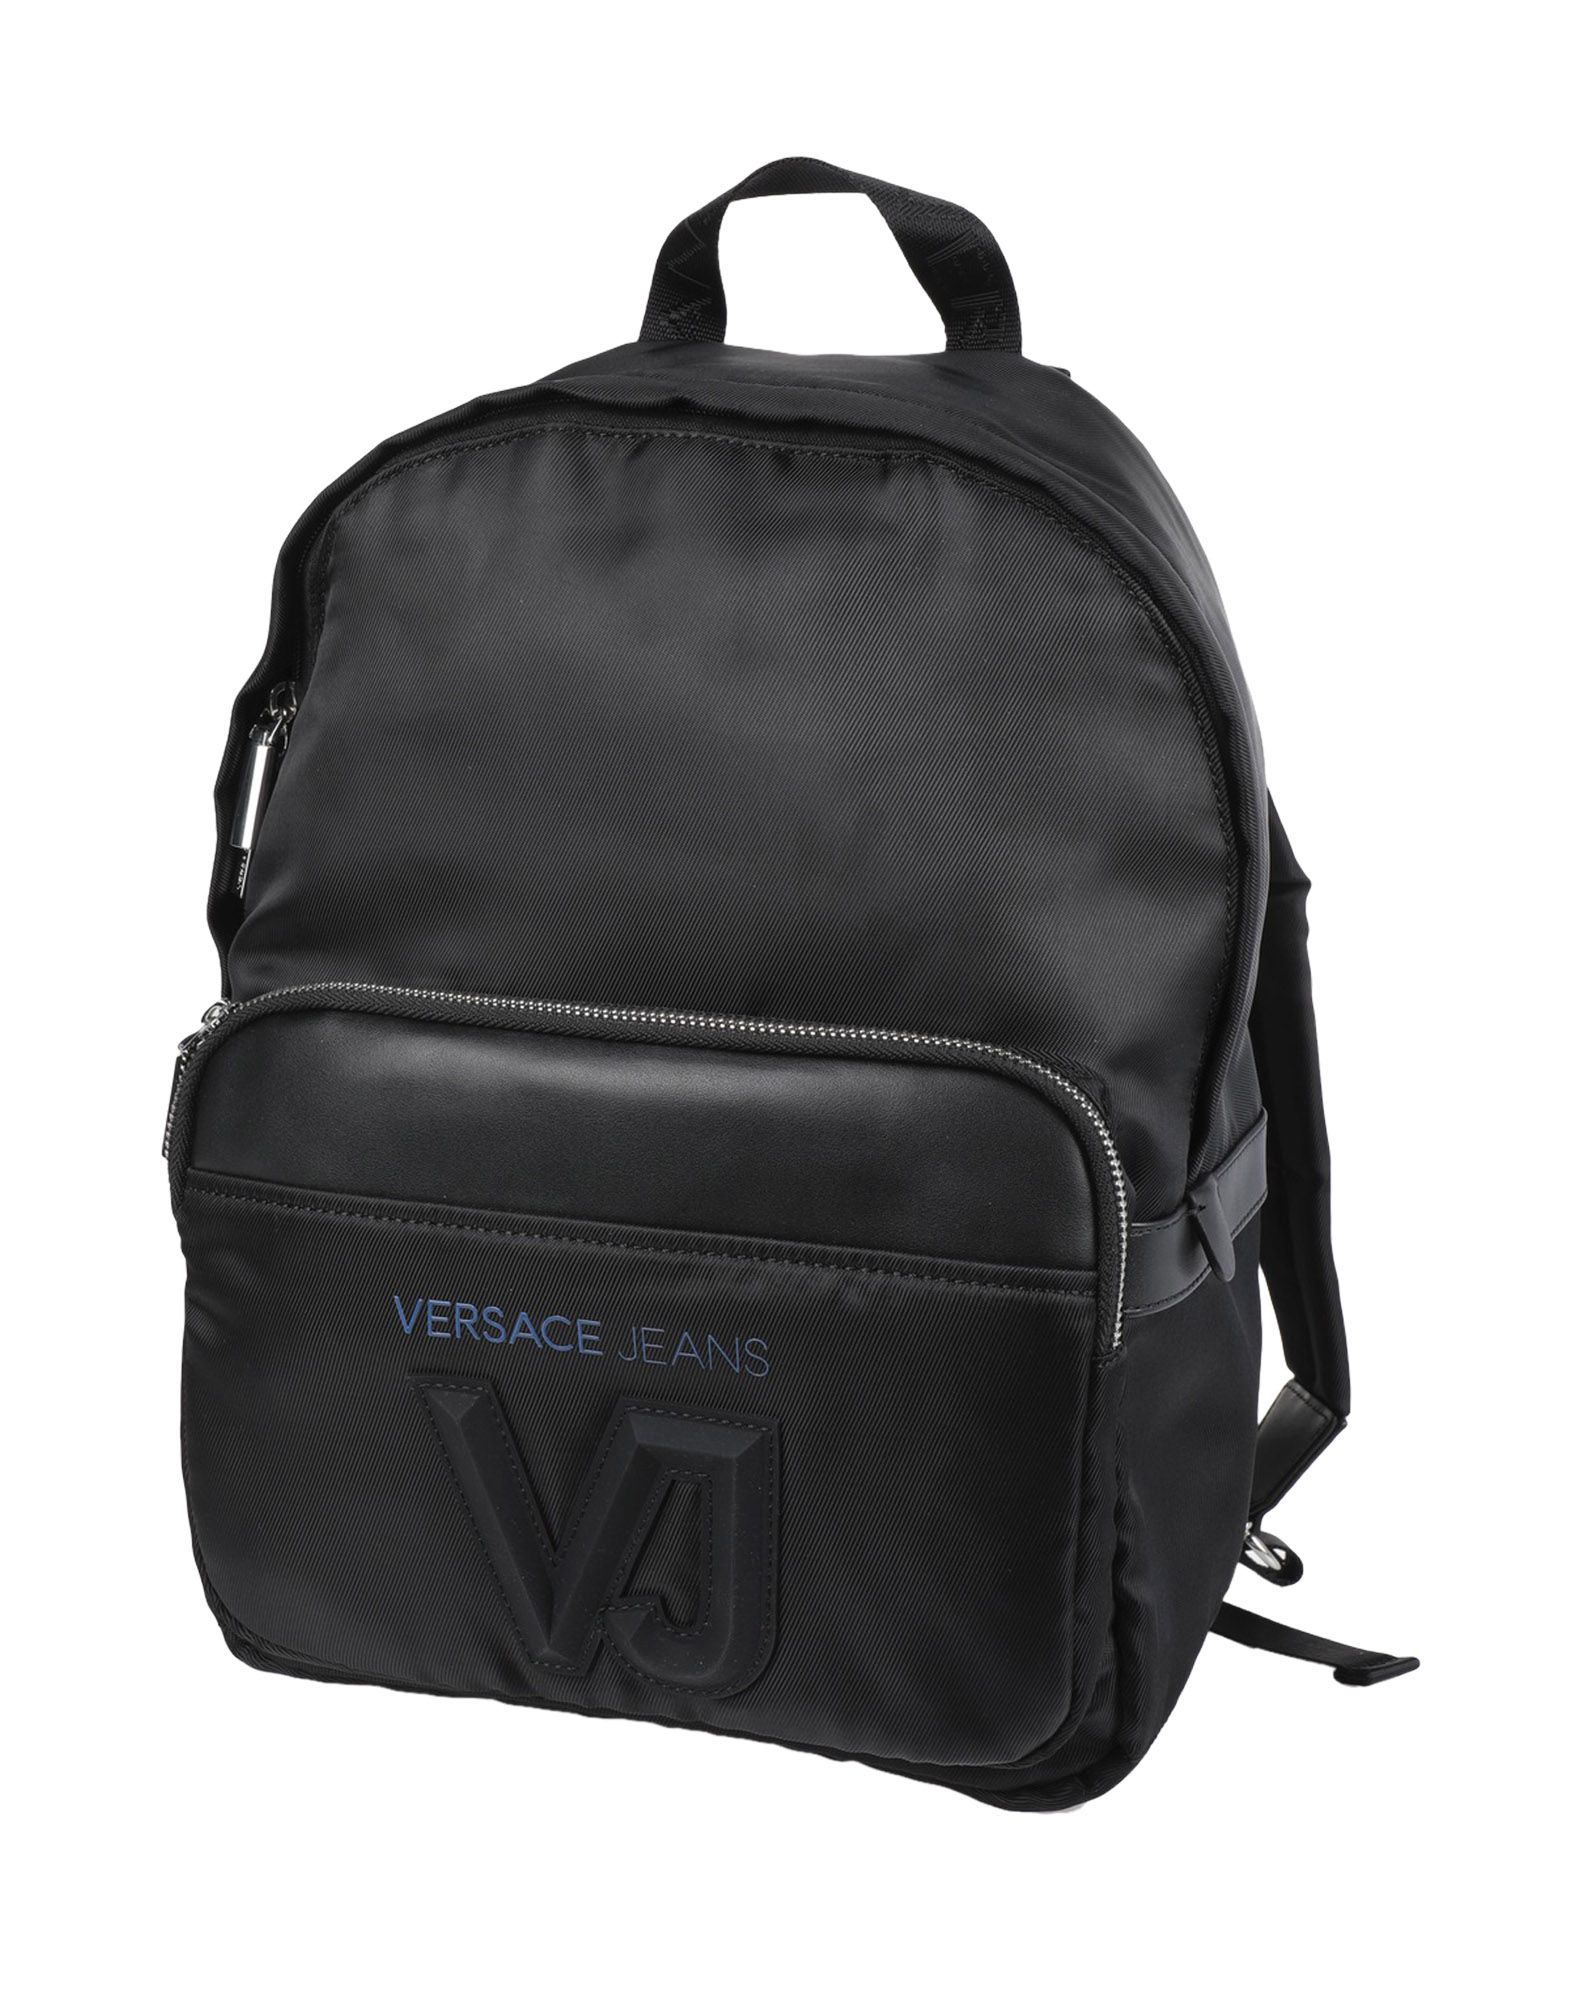 VERSACE JEANS Backpack & fanny pack,45456668AK 1